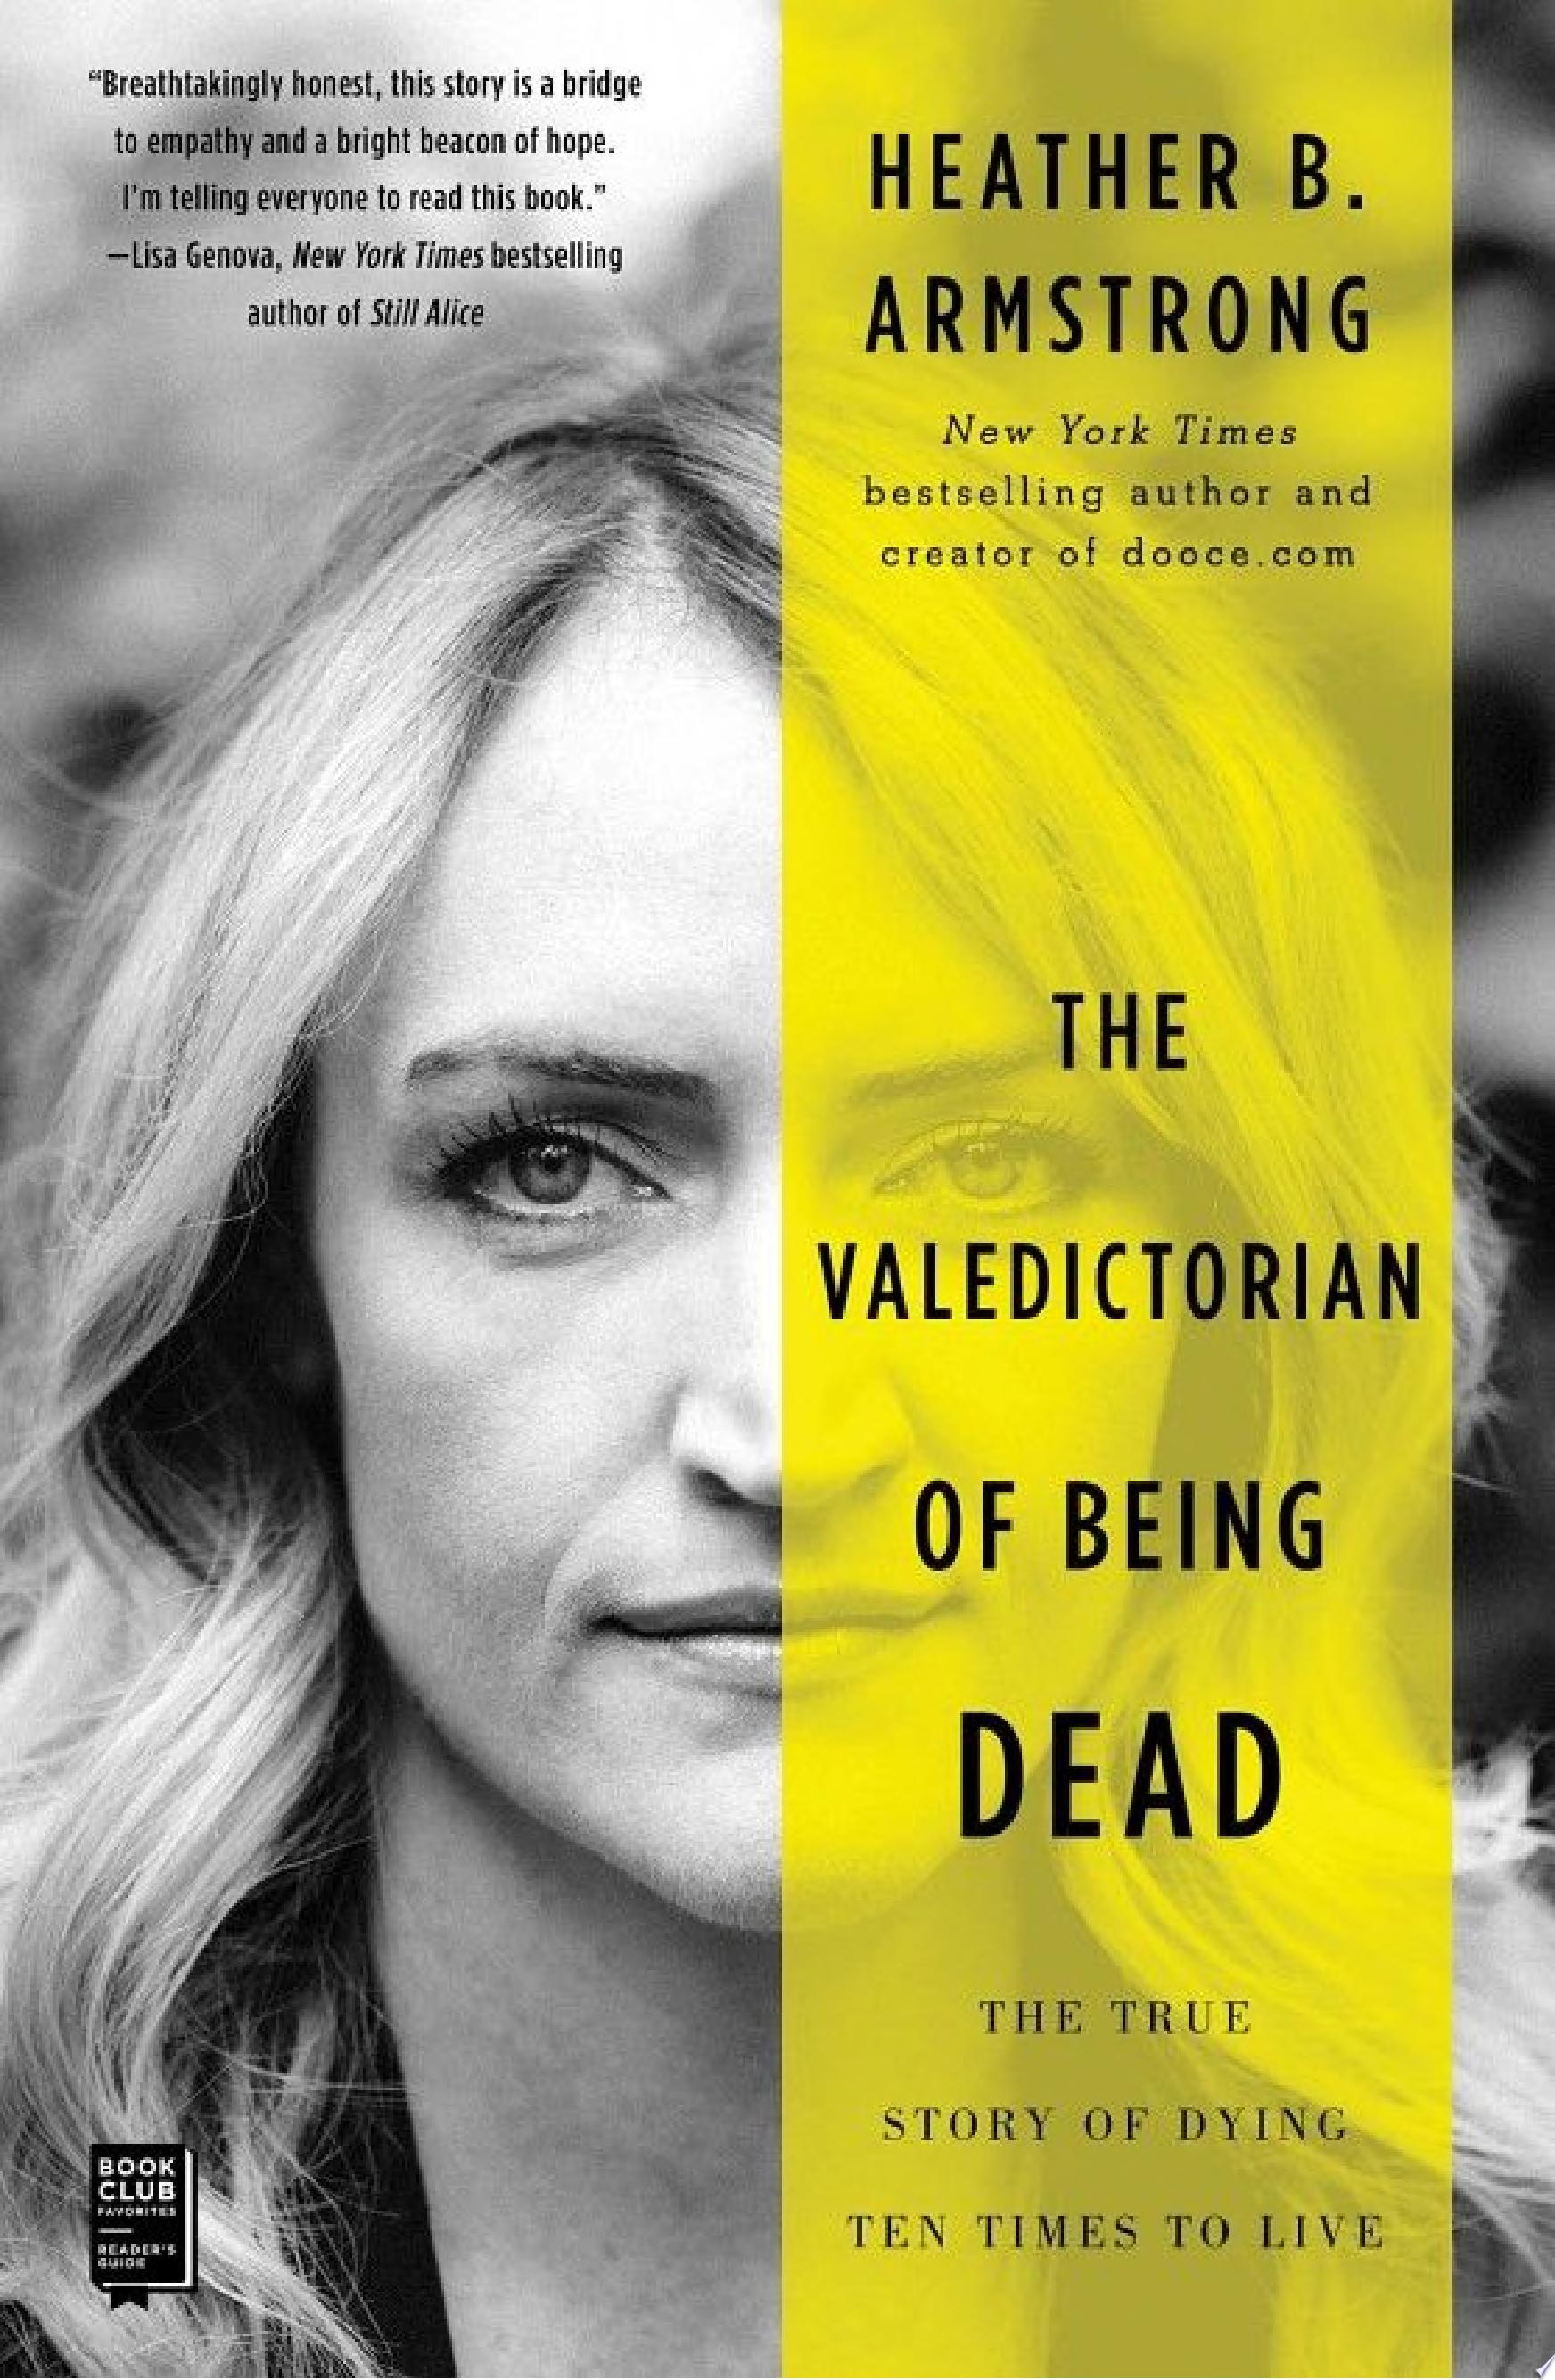 Image for "The Valedictorian of Being Dead"